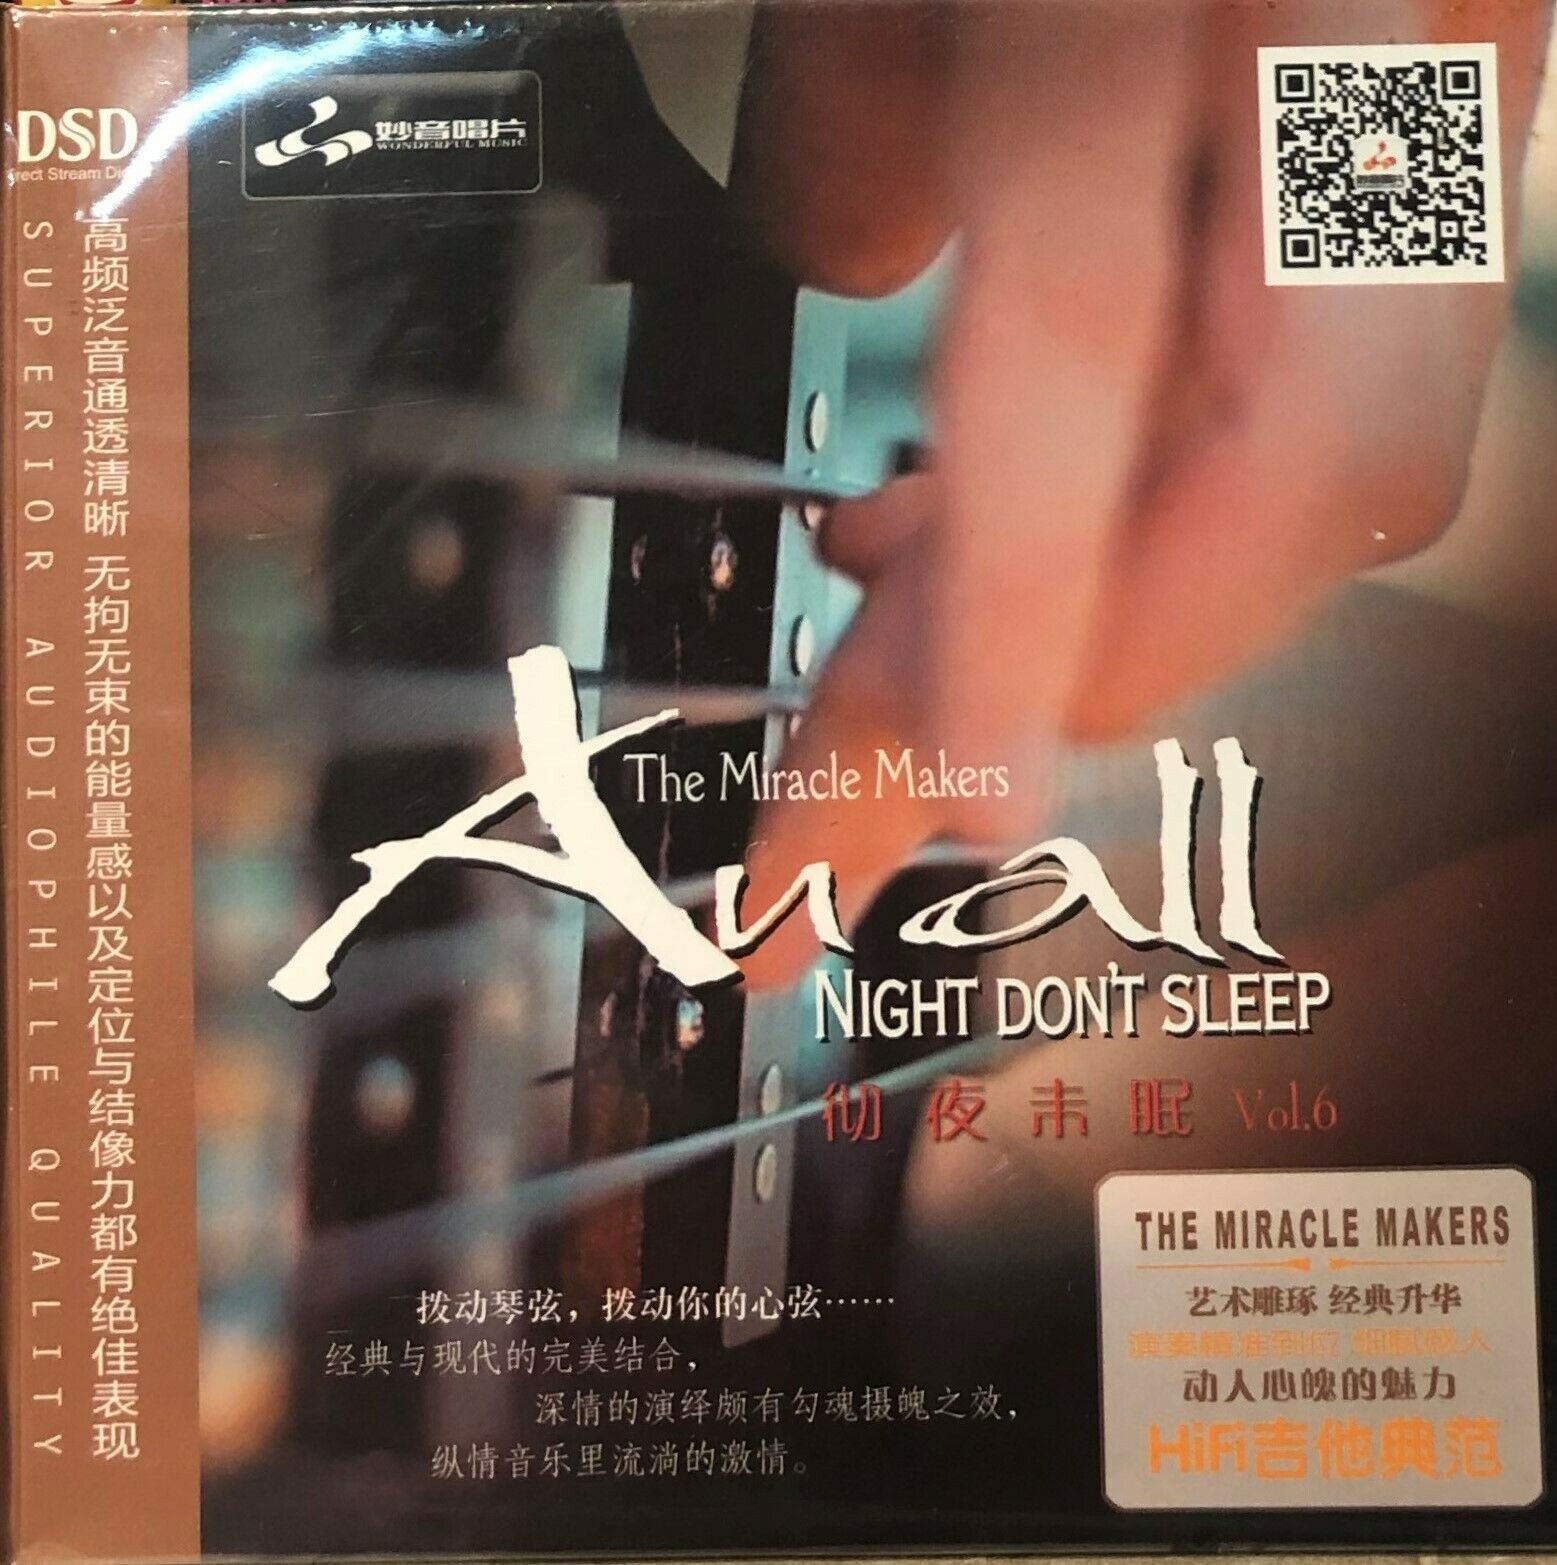 THE MIRACLE MAKERS AUALL NIGHT DON'T SLEEP - INSTRUMENTAL (CD)